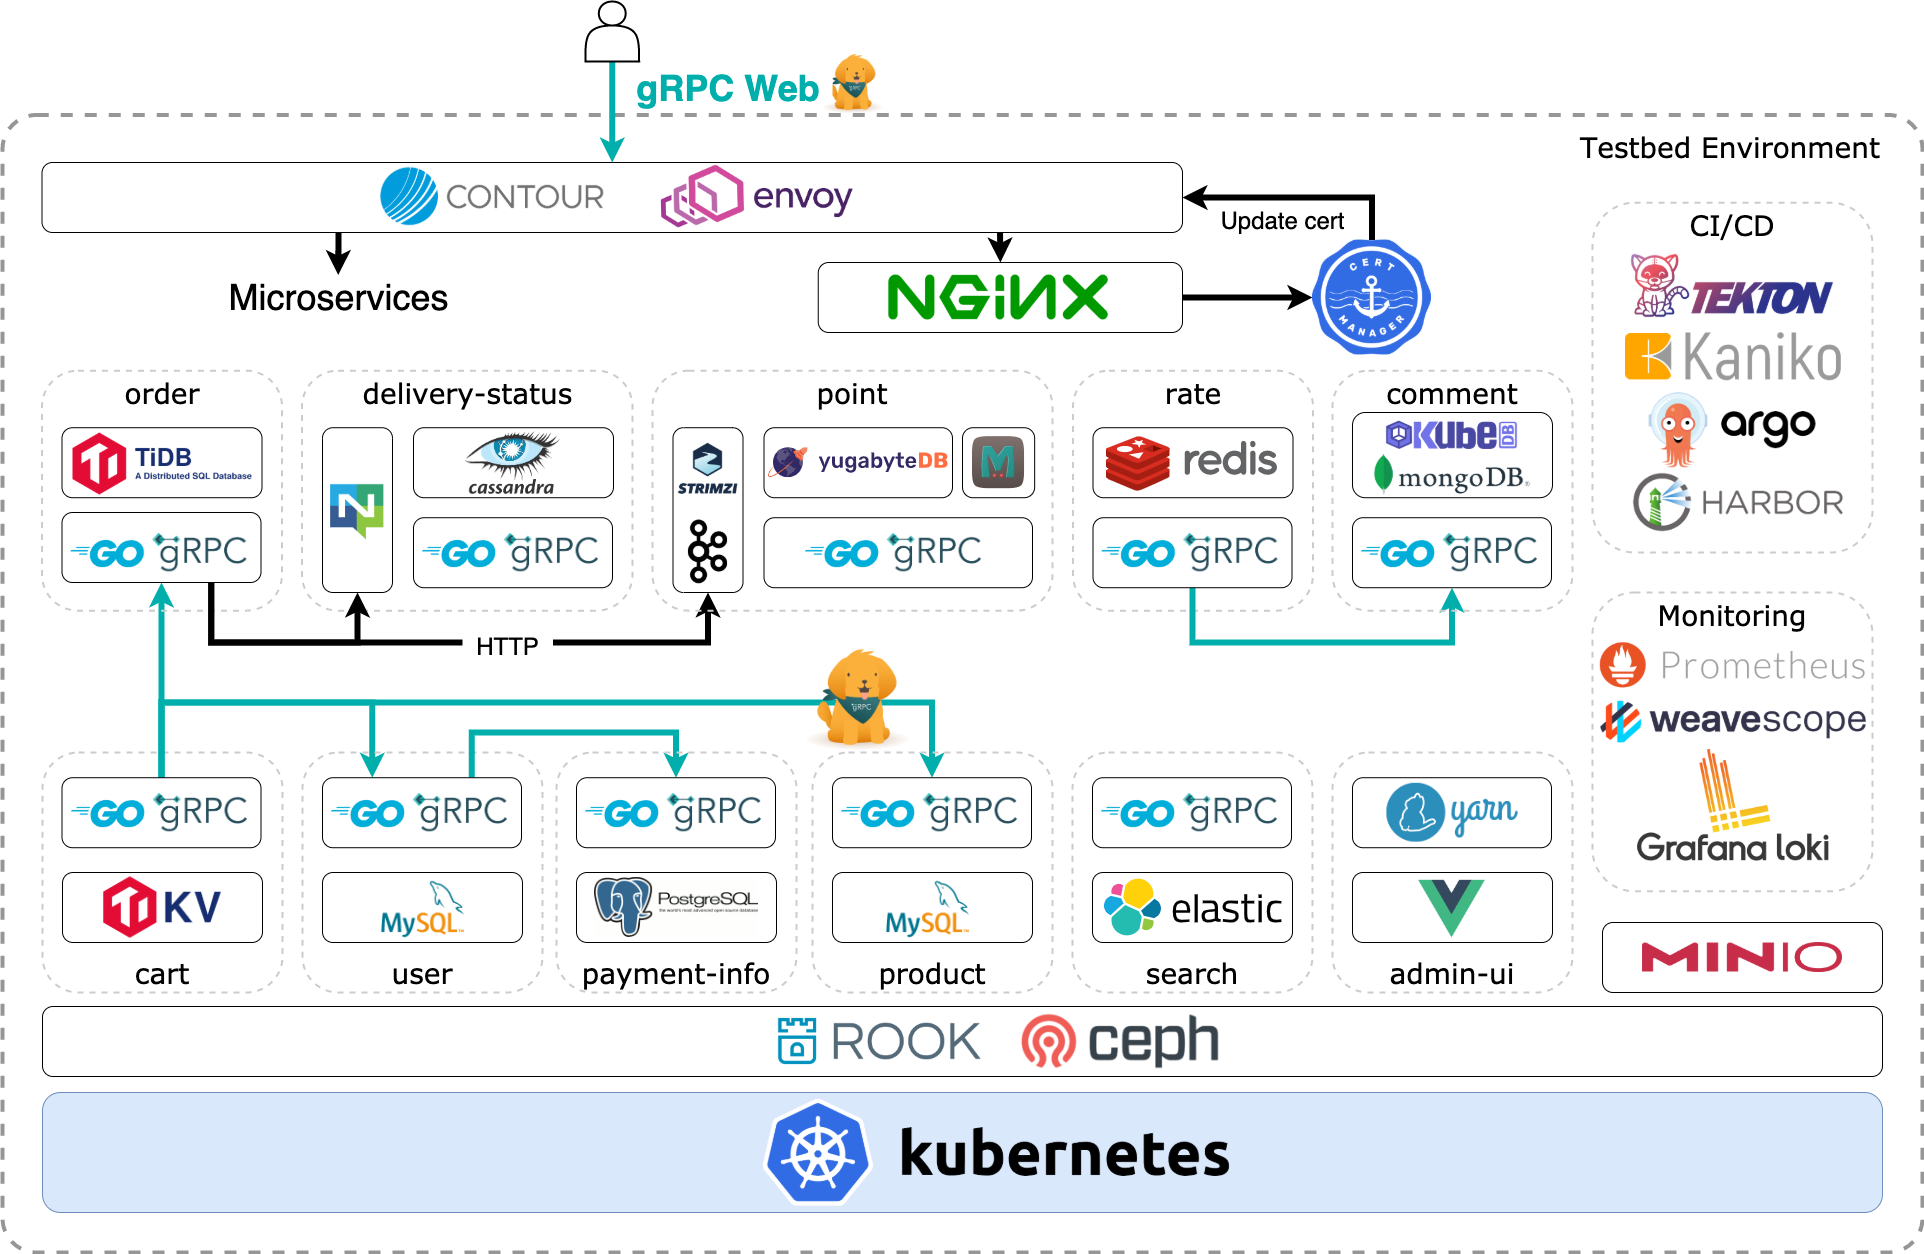 Kubernetes-native testbed OSS for modern cloud native architecture